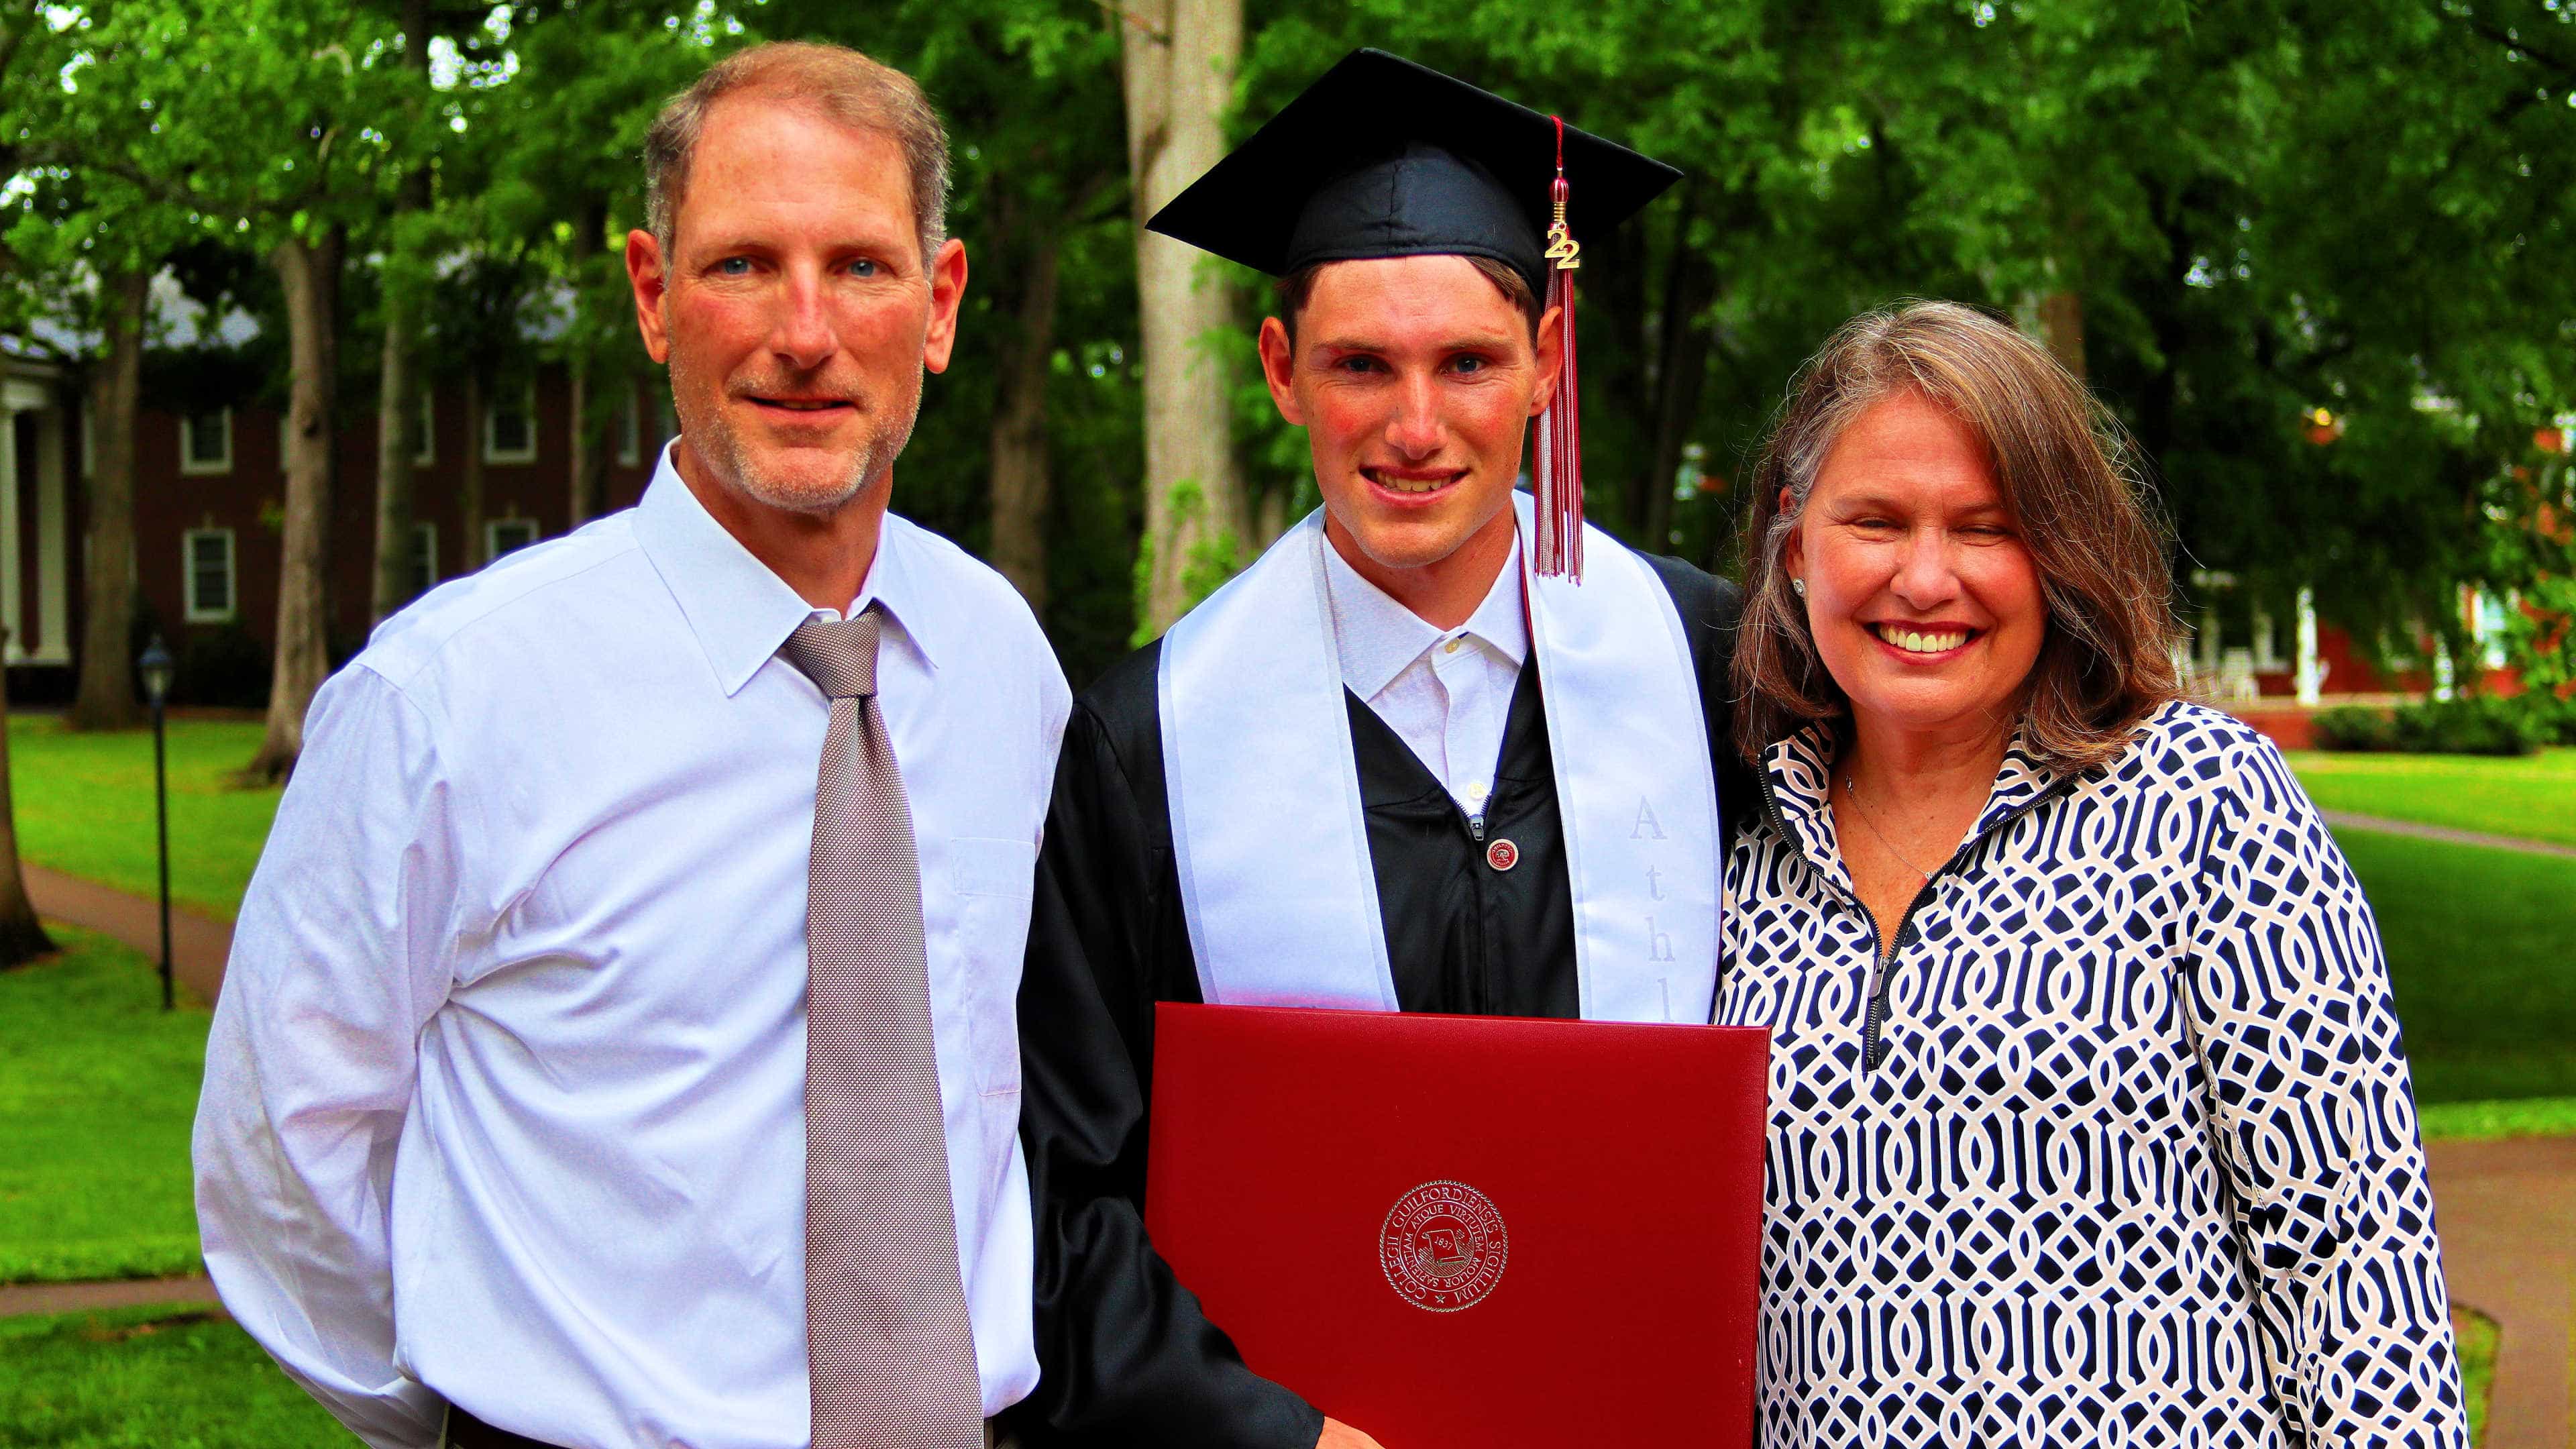 A student holding their diploma takes a photo with two family members..